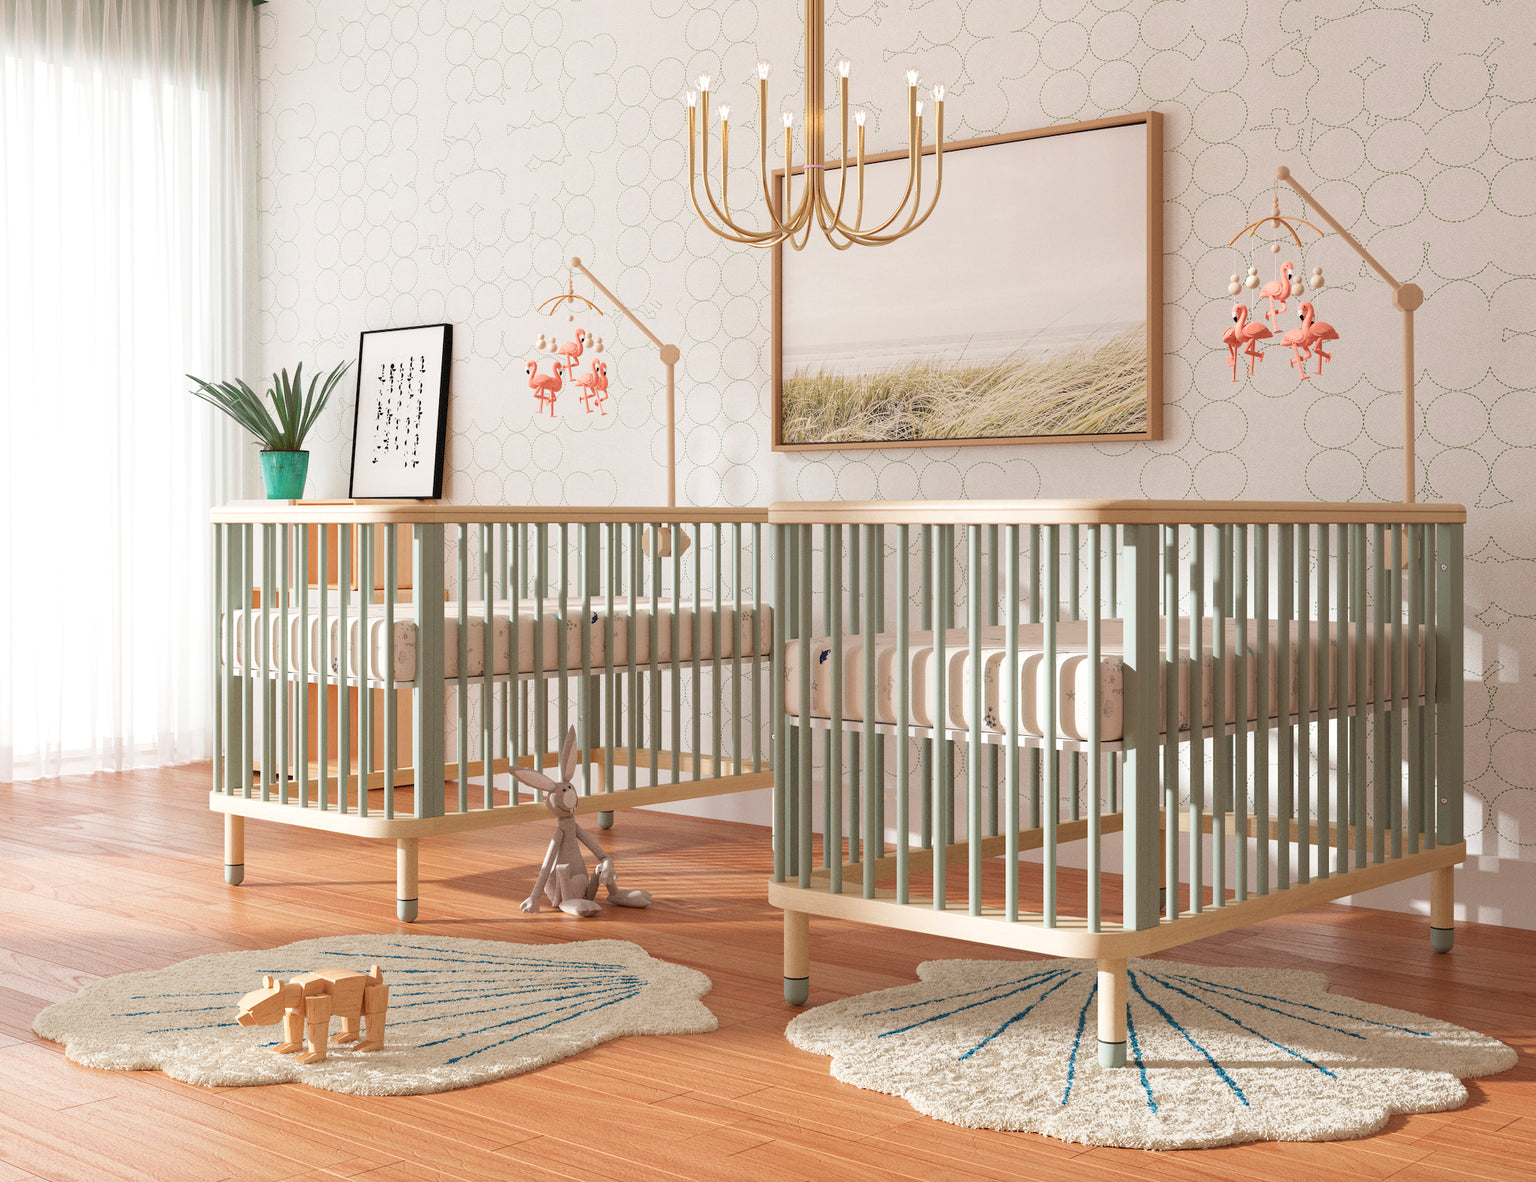 6 Twin Nursery Ideas That Are Double the Fun